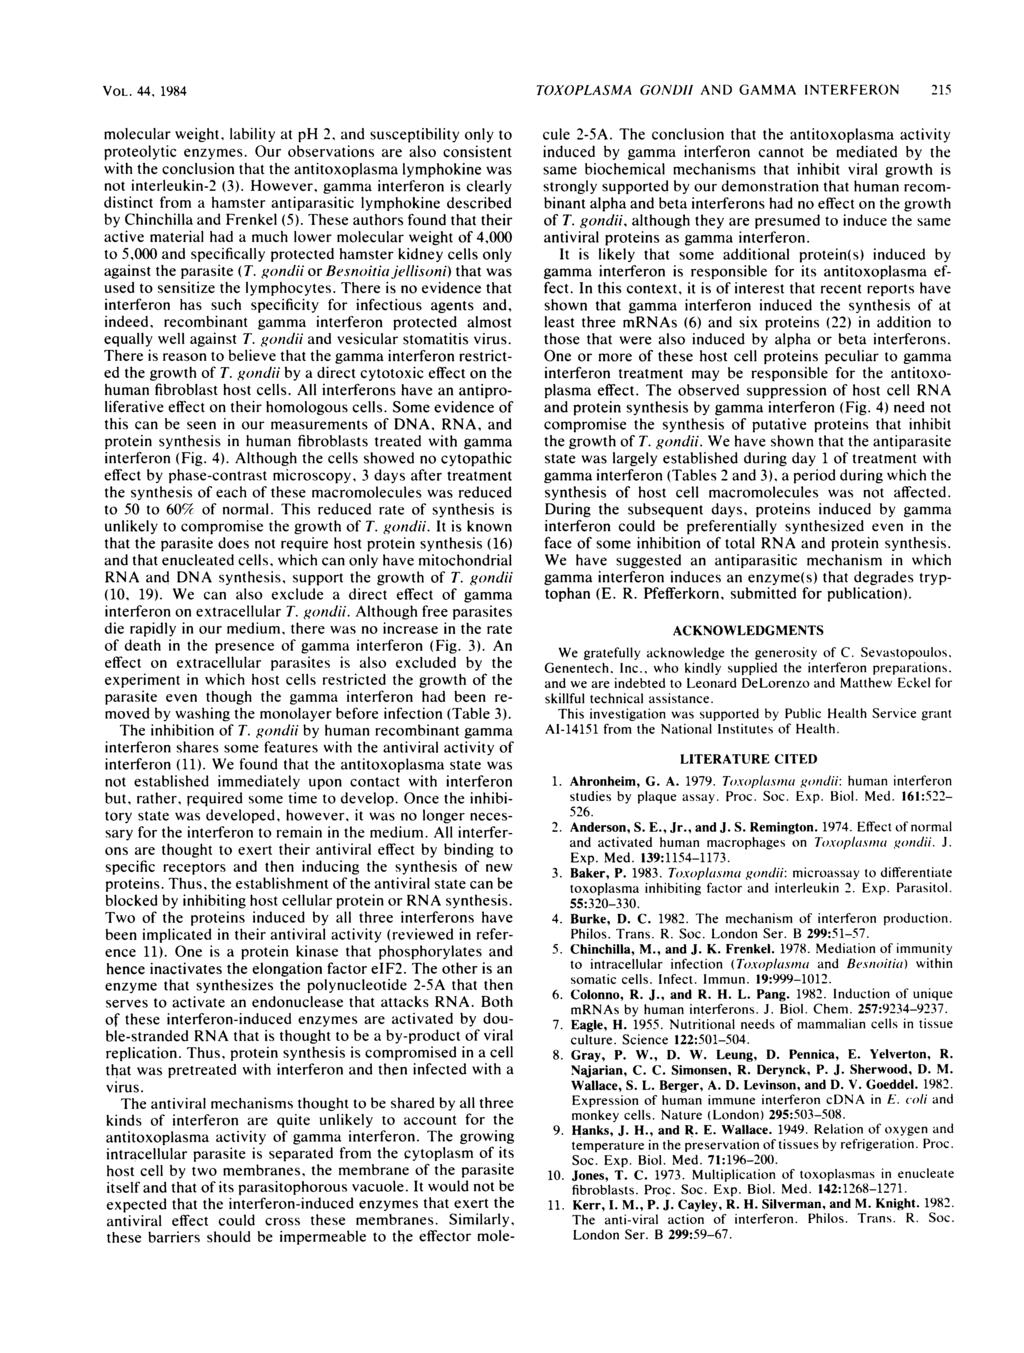 VOL. 44, 1984 molecular weight, lability at ph 2, and susceptibility only to proteolytic enzymes.